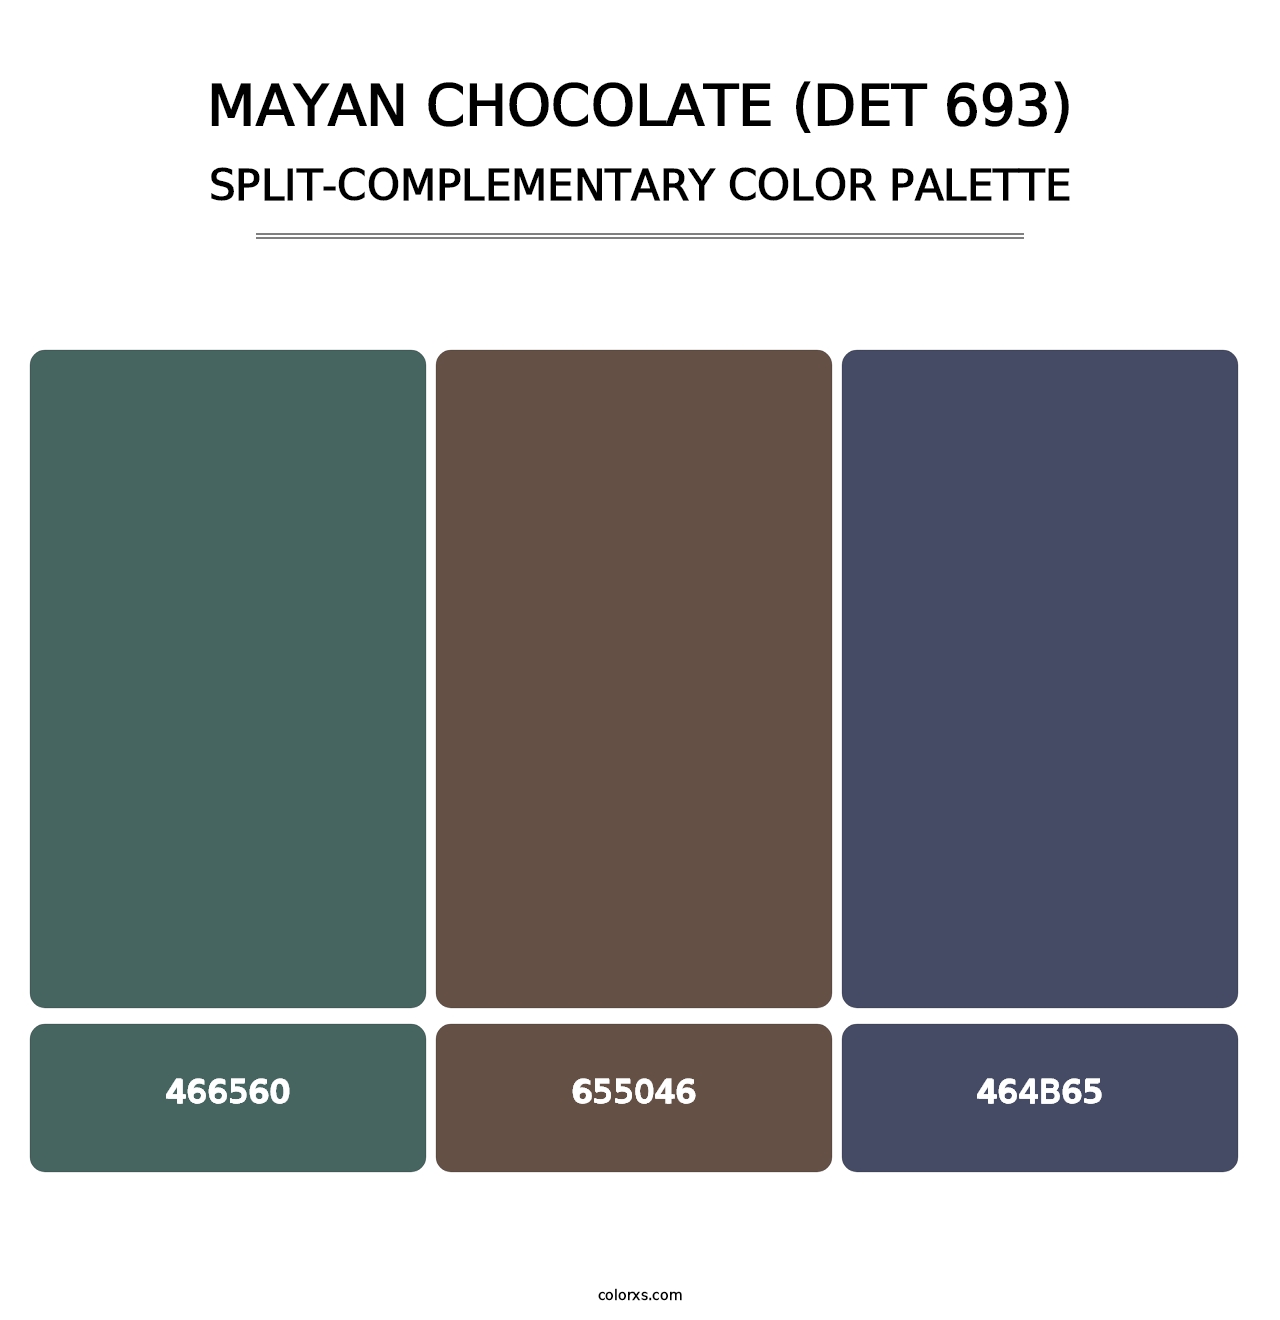 Mayan Chocolate (DET 693) - Split-Complementary Color Palette